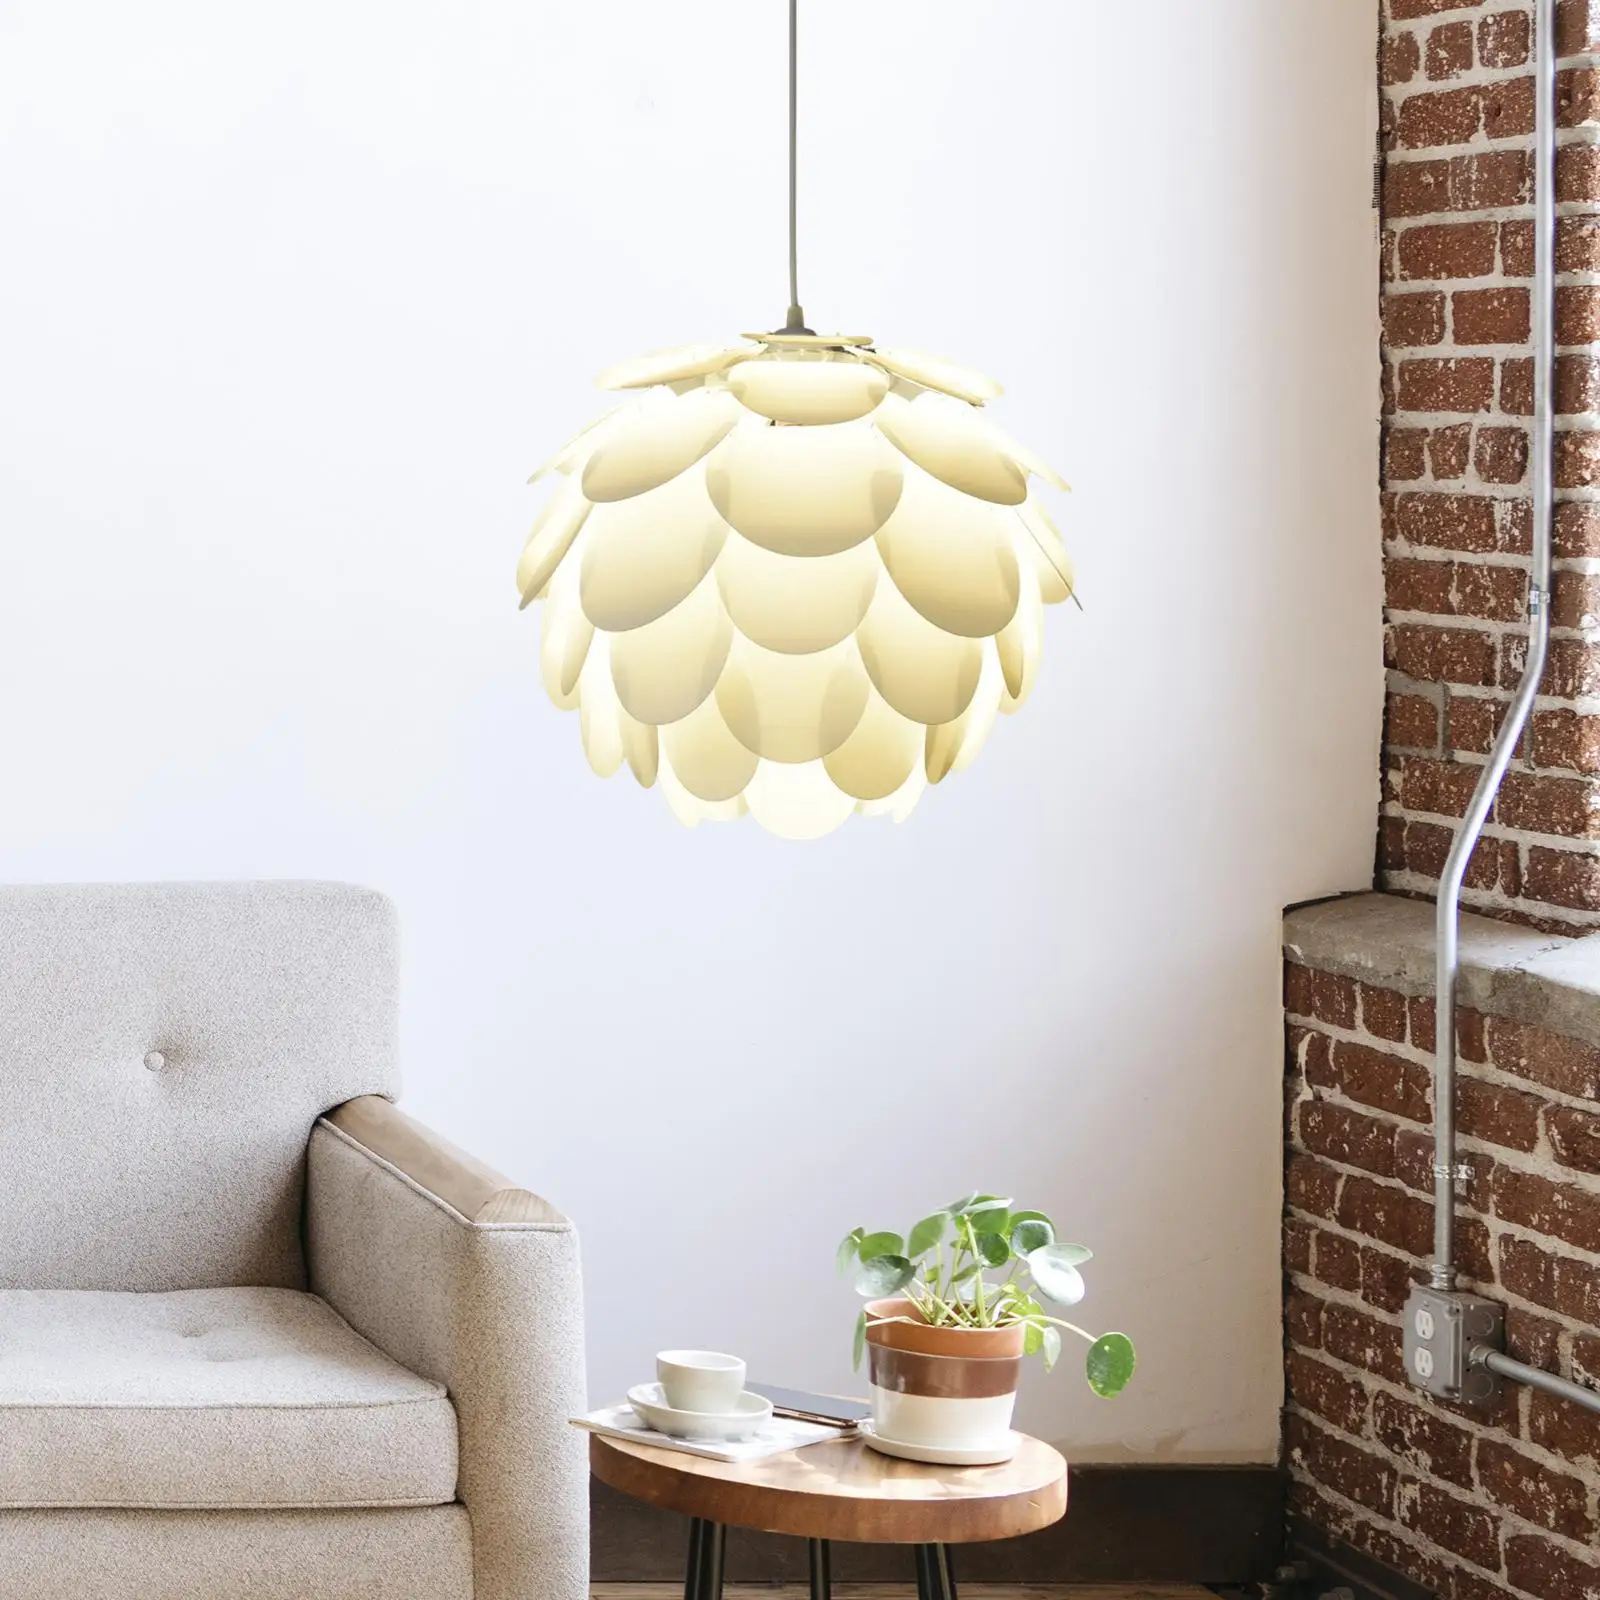 Lamp Shade Hanging Light Fixture Cover Crafts Replacement Chandelier Shade for Dining Room Farmhouse Kitchen Teahouse Decor